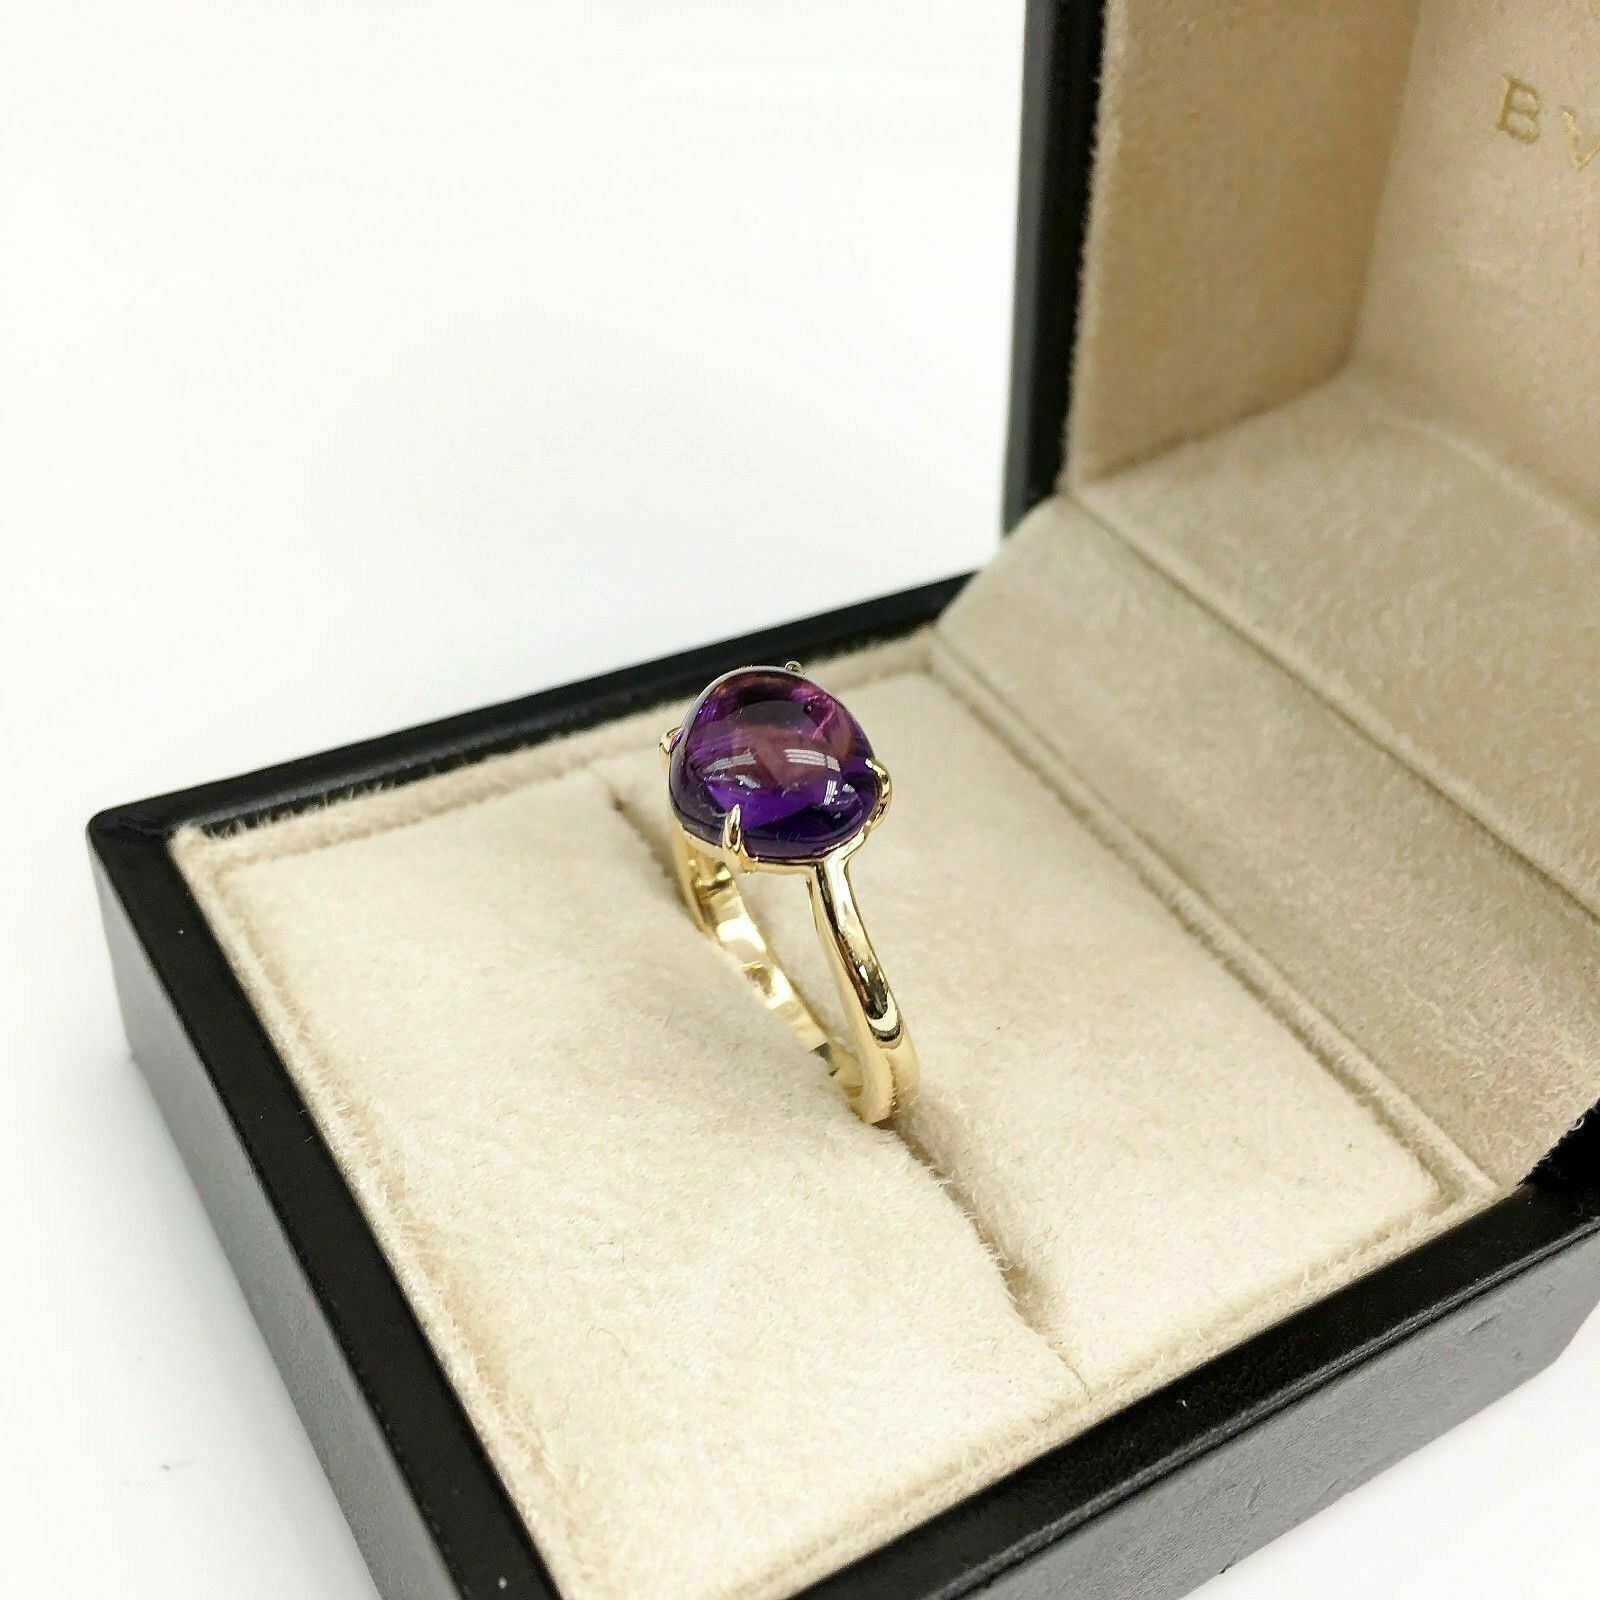 Authentic Bvlgari Solid 18 Karat Gold Sassi Amethyst Ring with Box Made in Italy